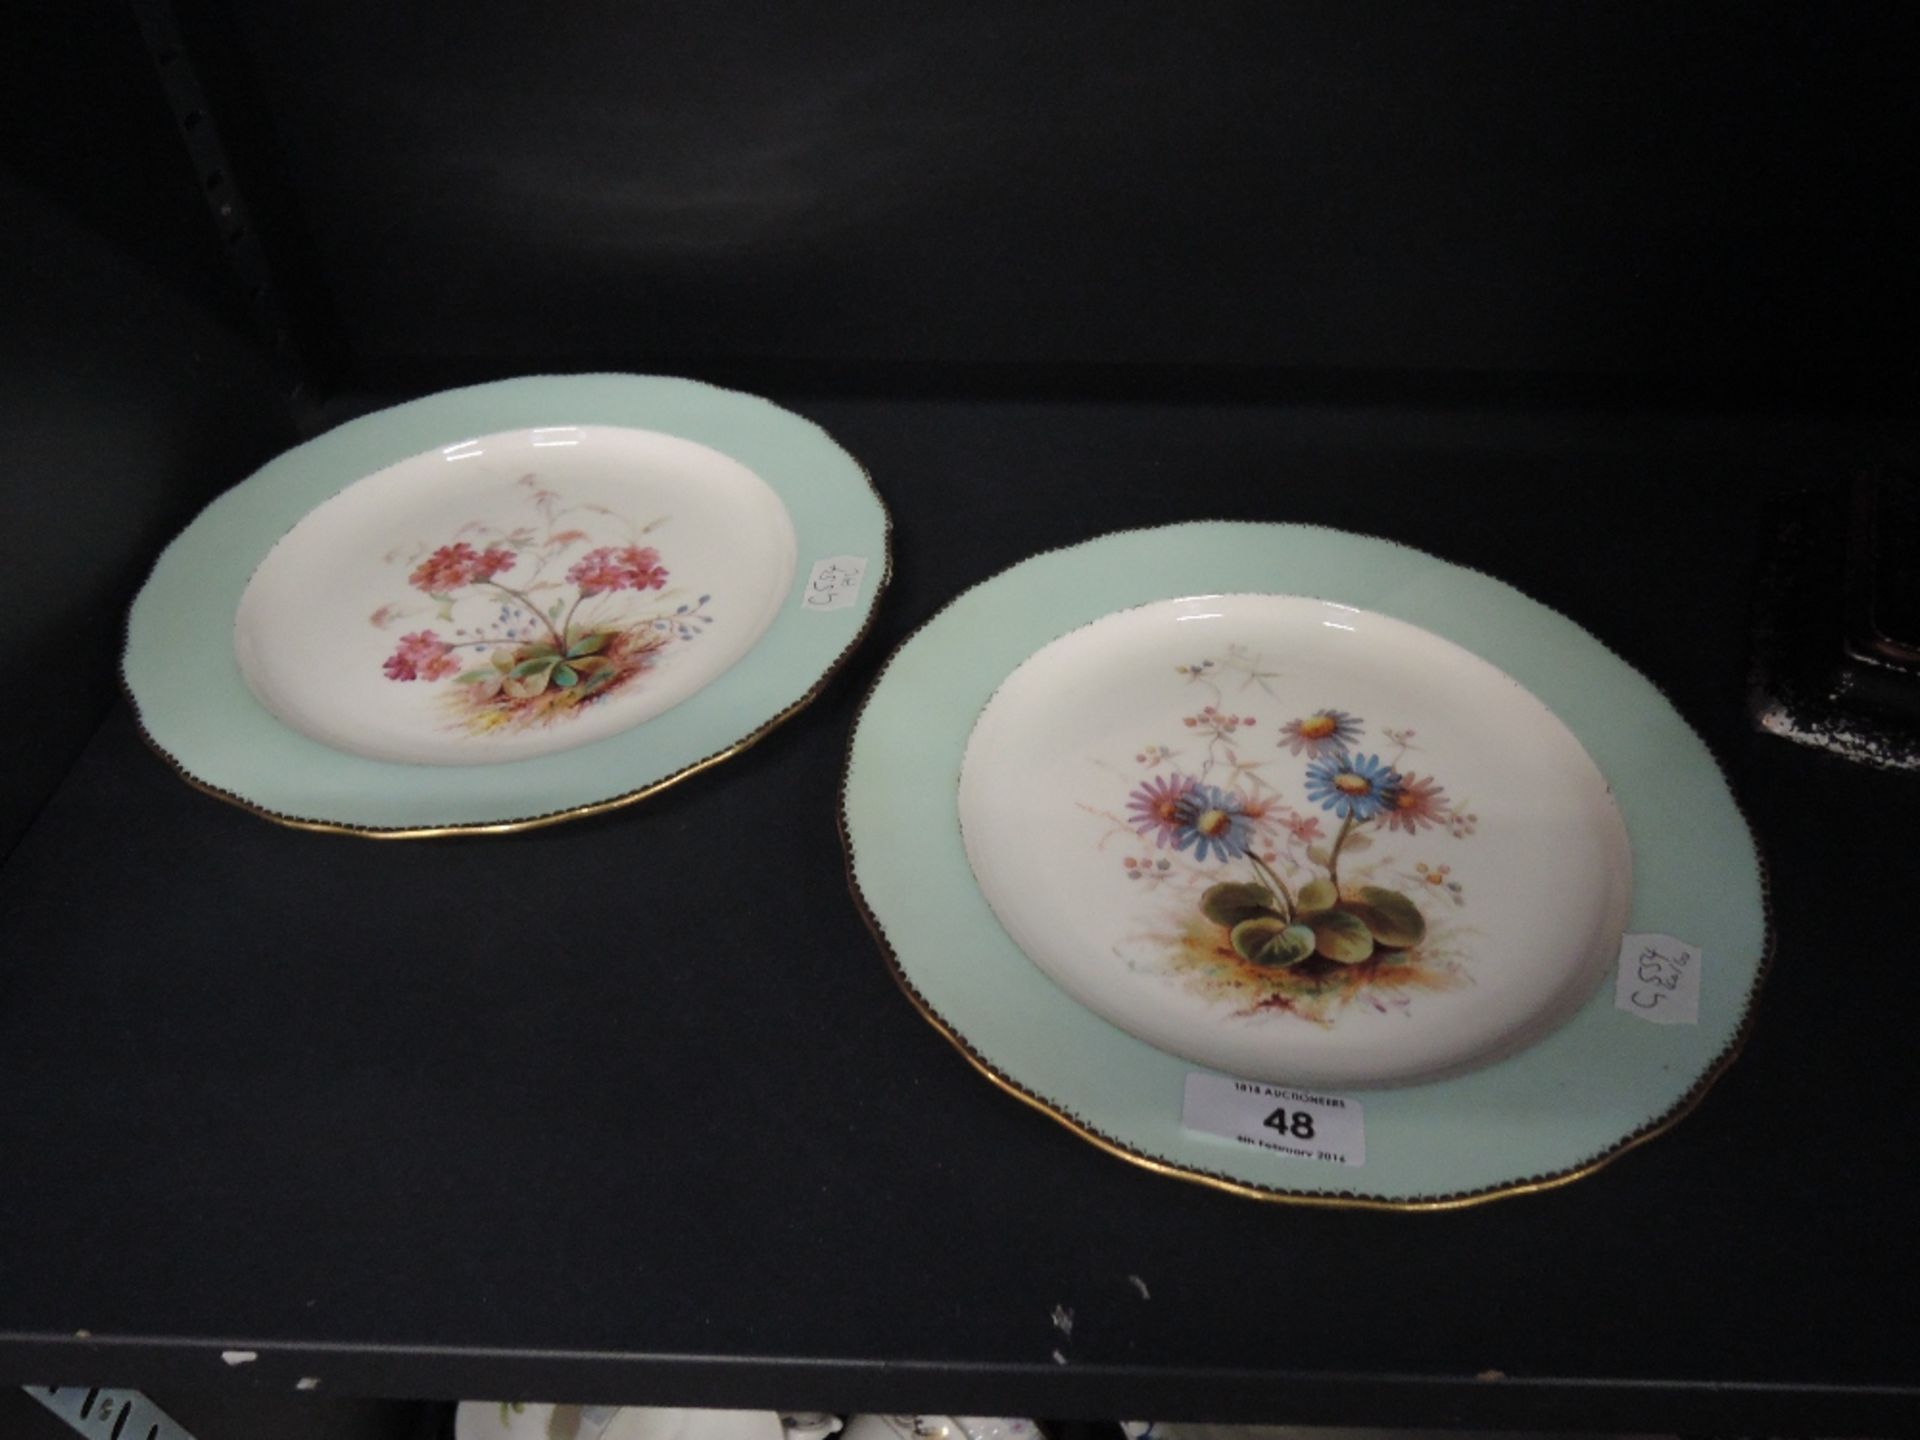 A pair of 19th century Derby plates having hand-painted pictorial floral decoration